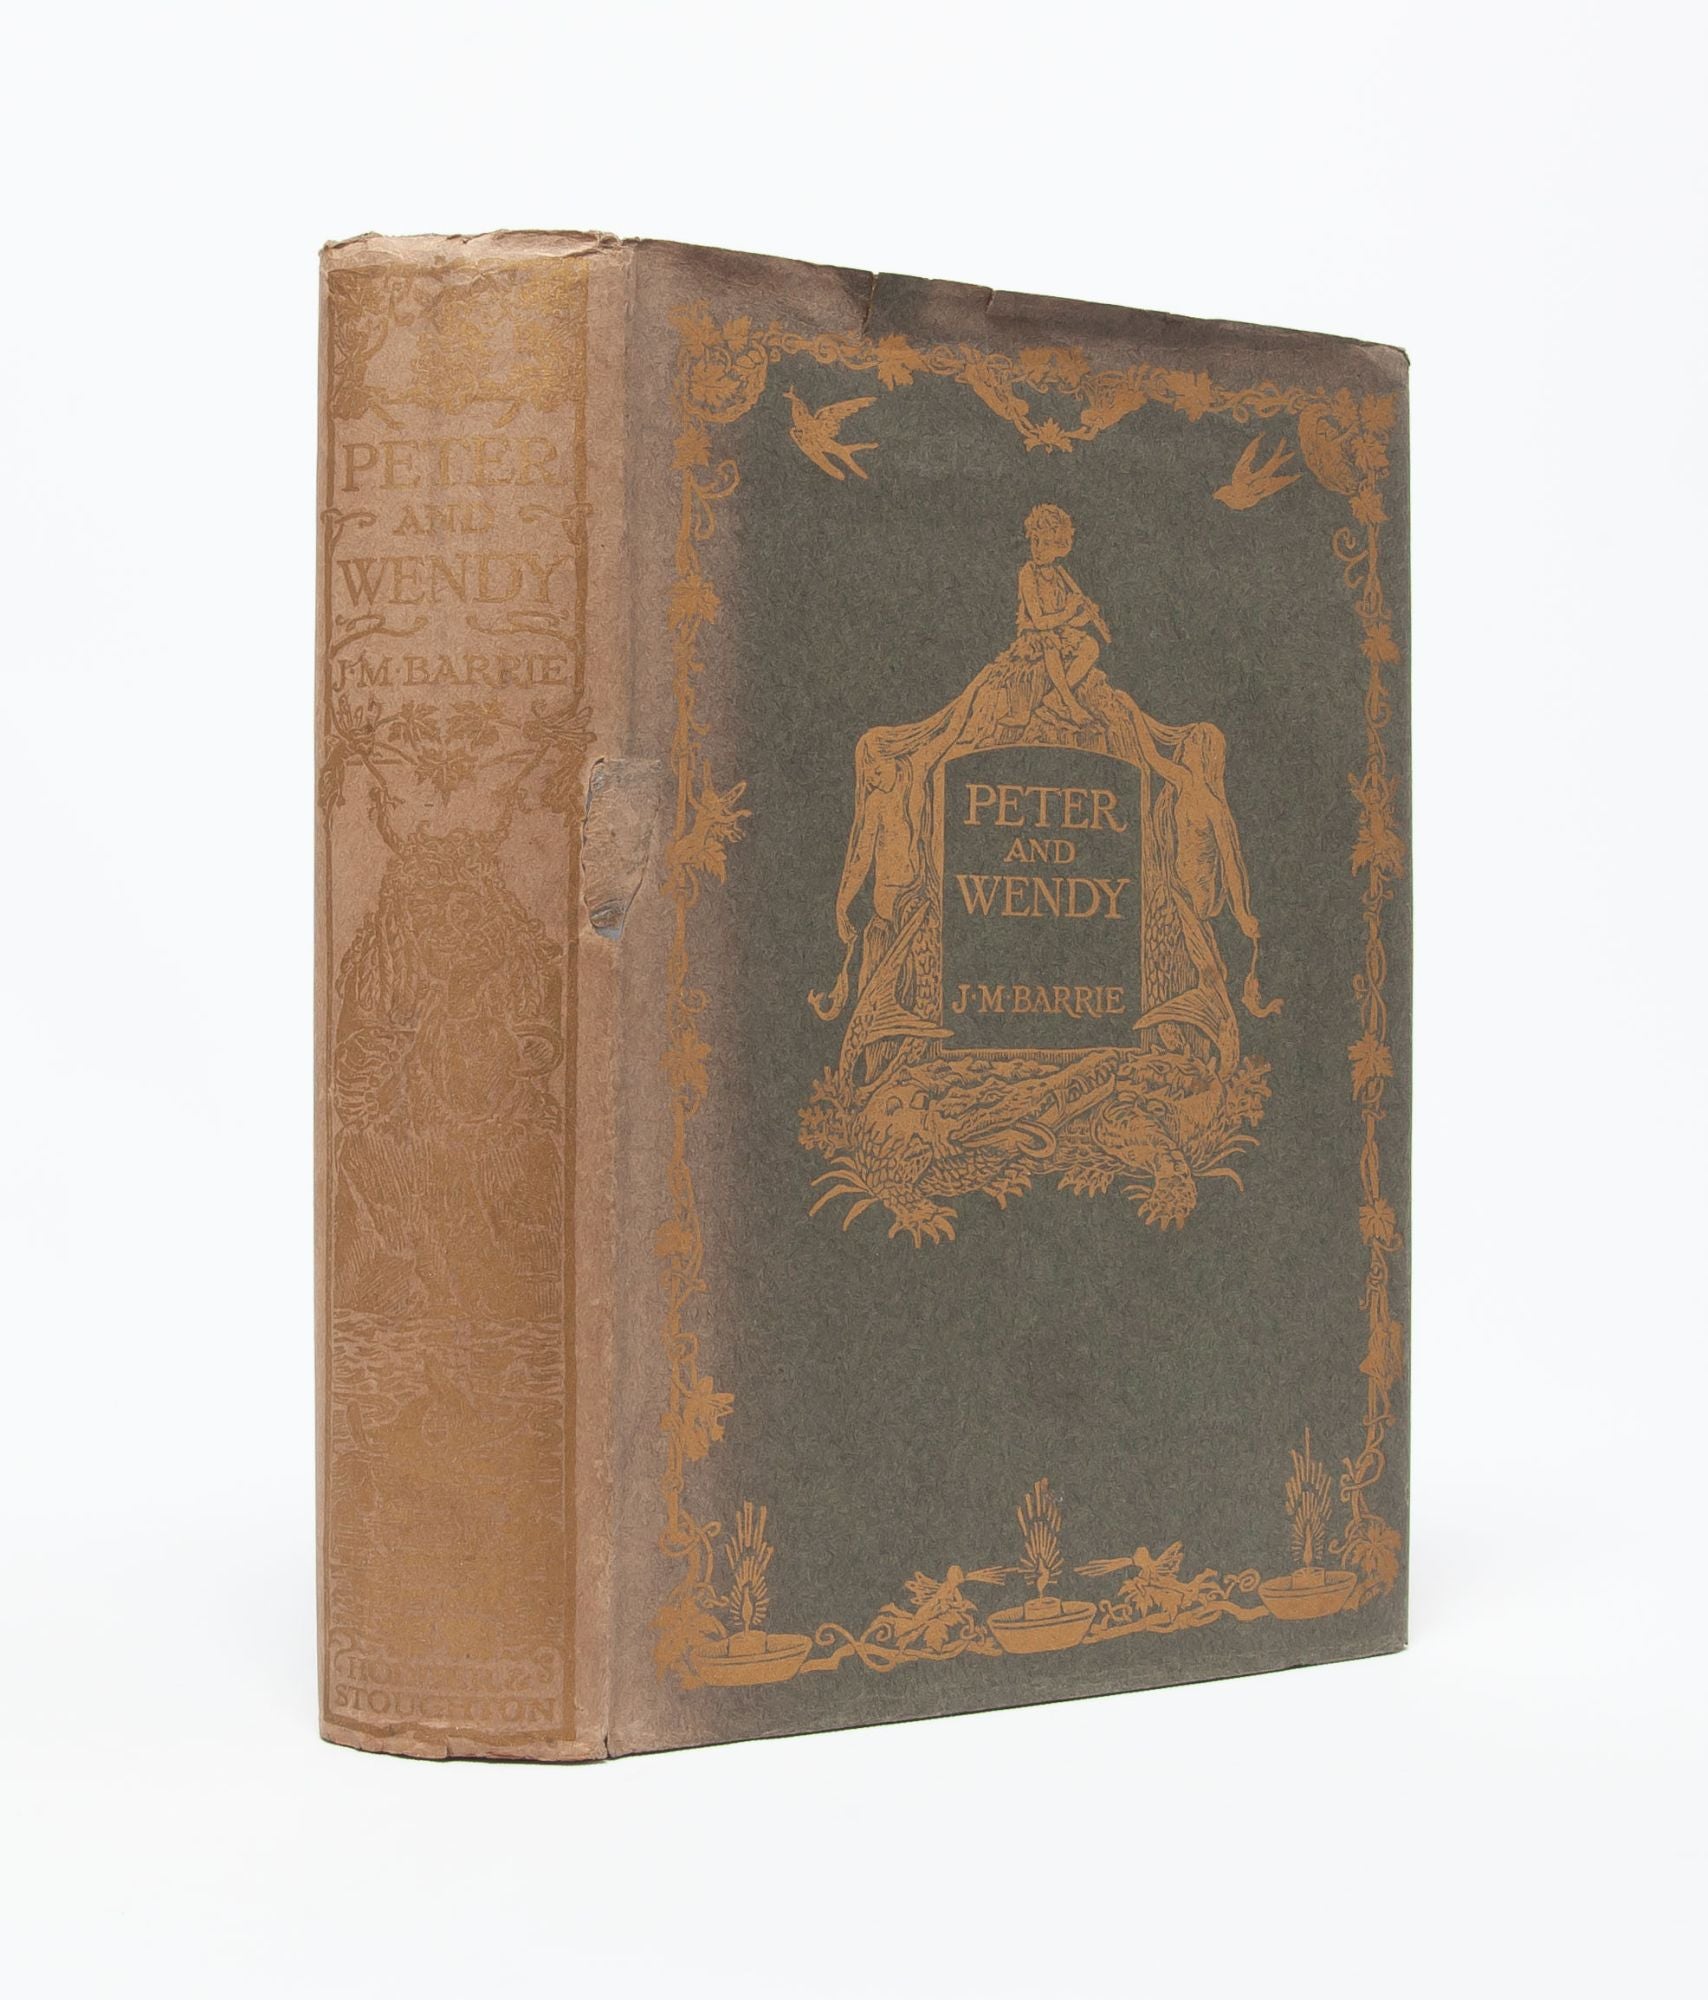 (Item #5330) Peter and Wendy. J. M. Barrie.